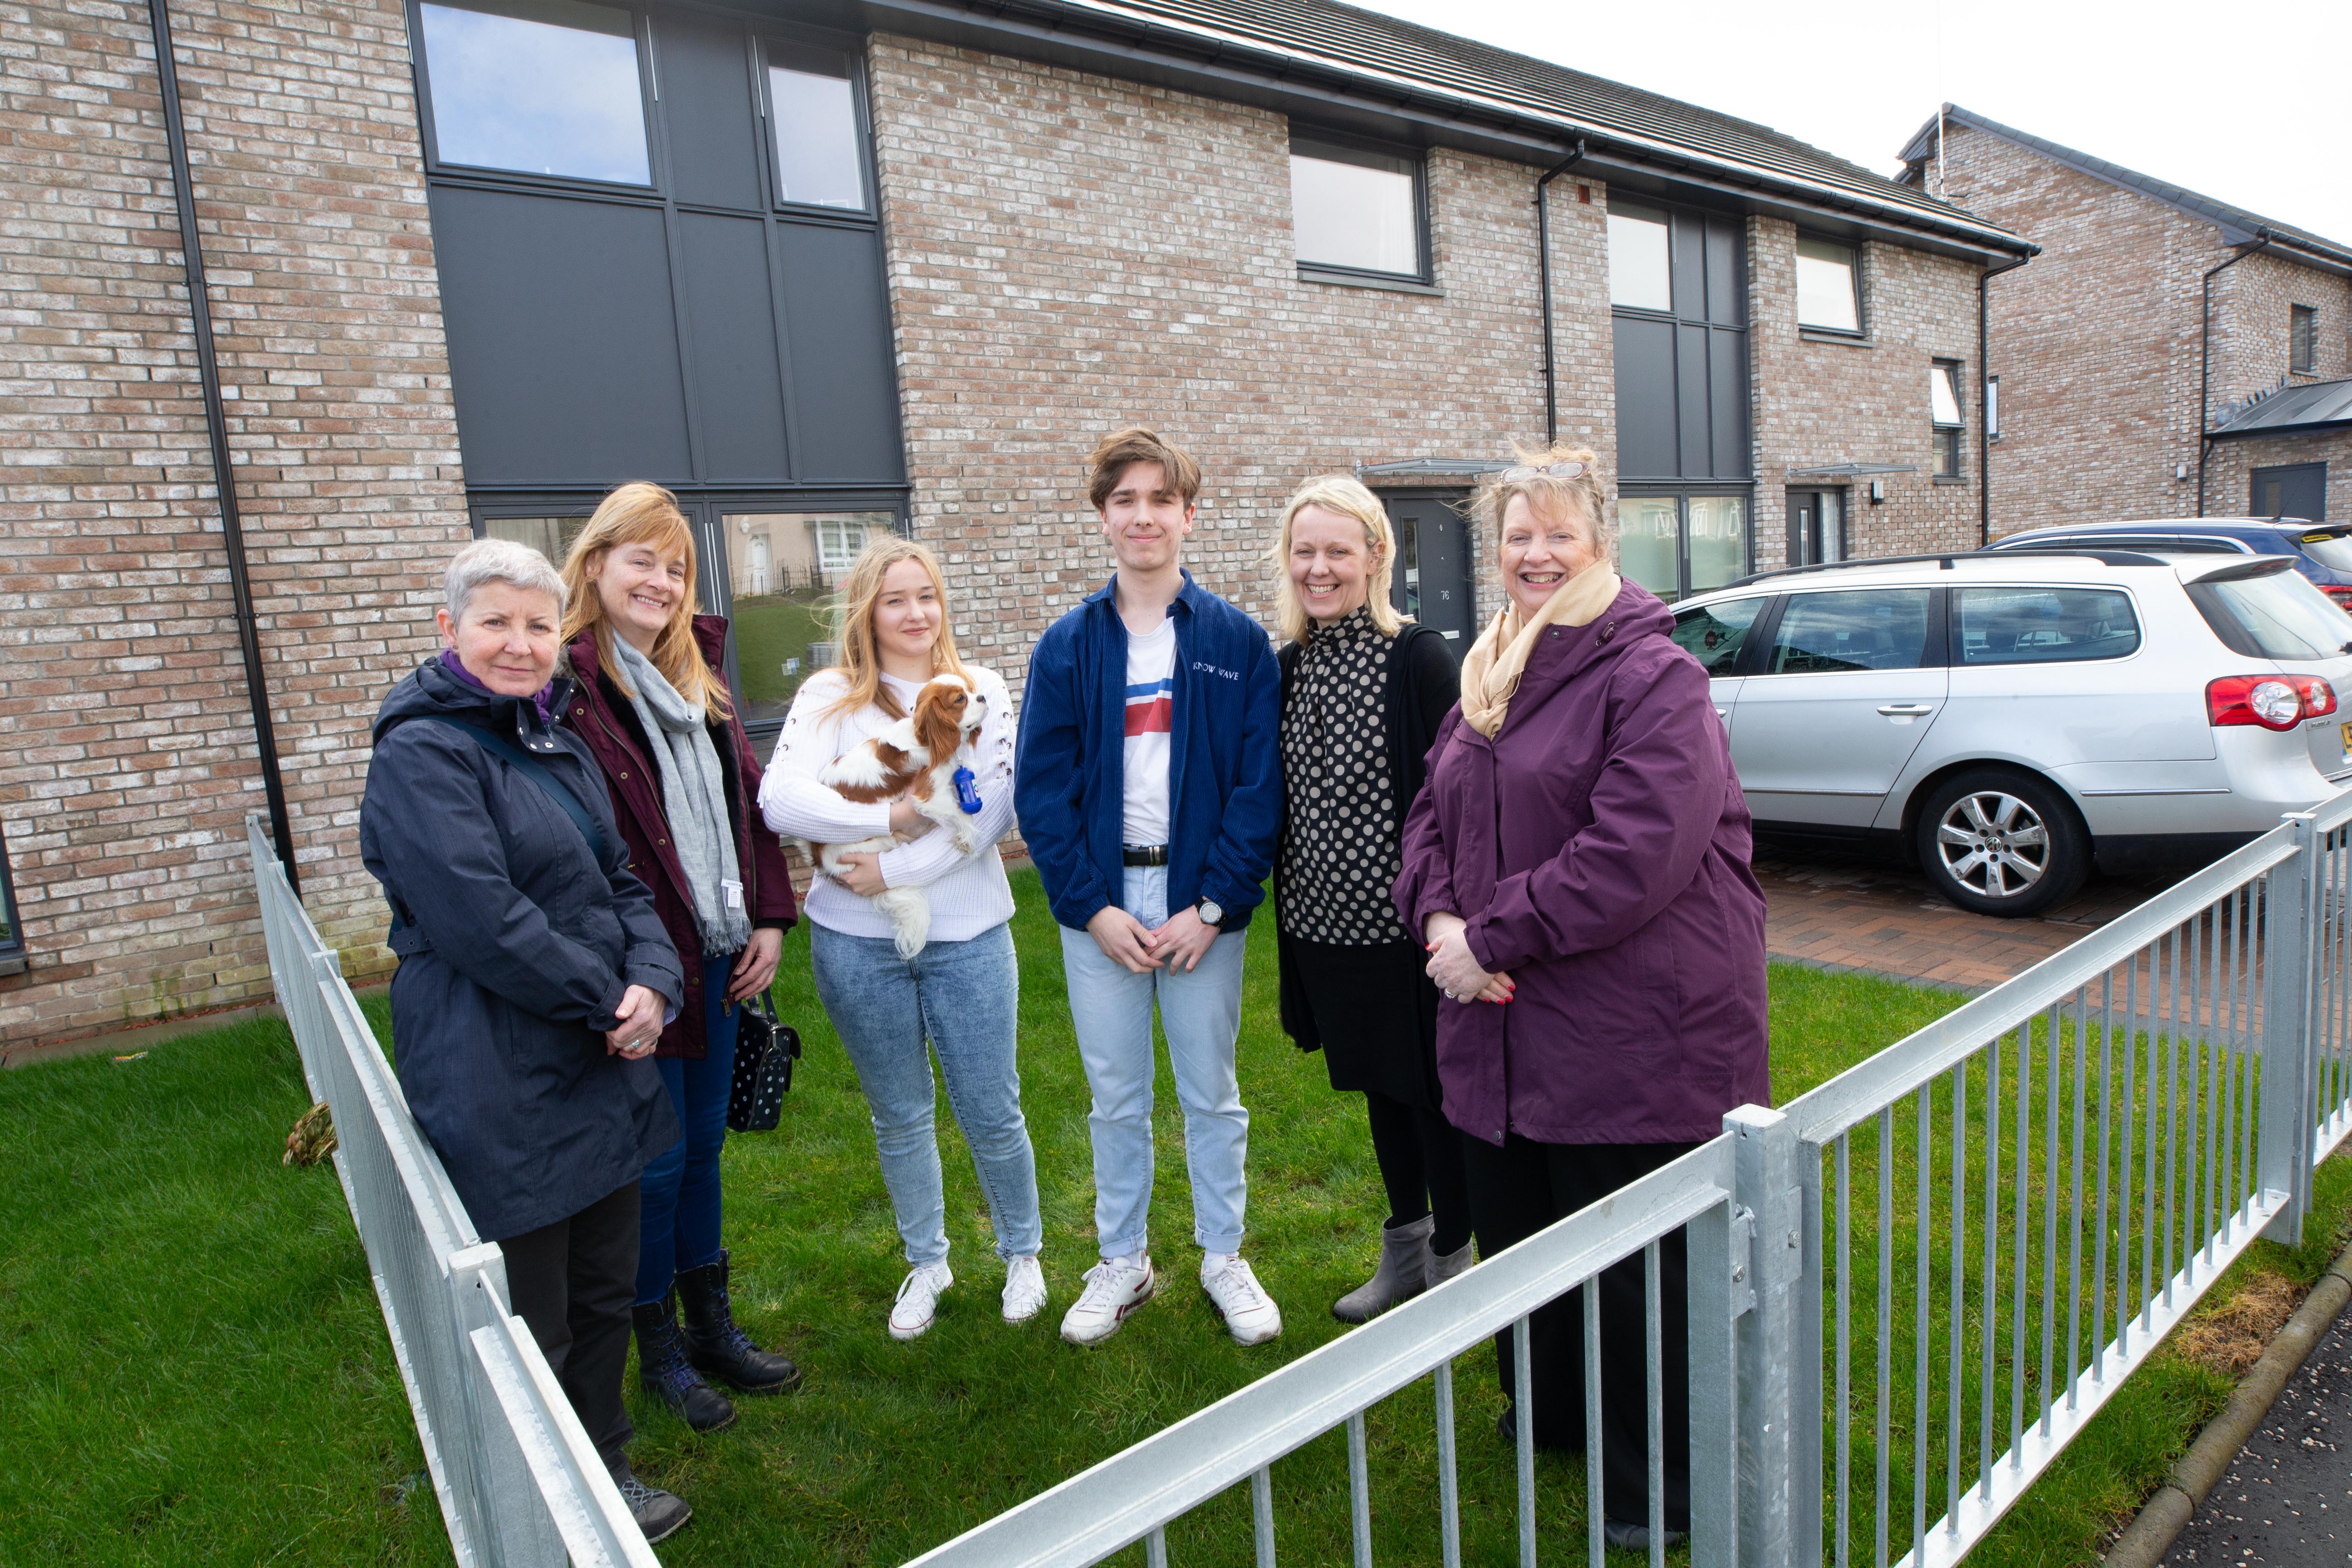 New Cube homes are toast of Dumbarton community